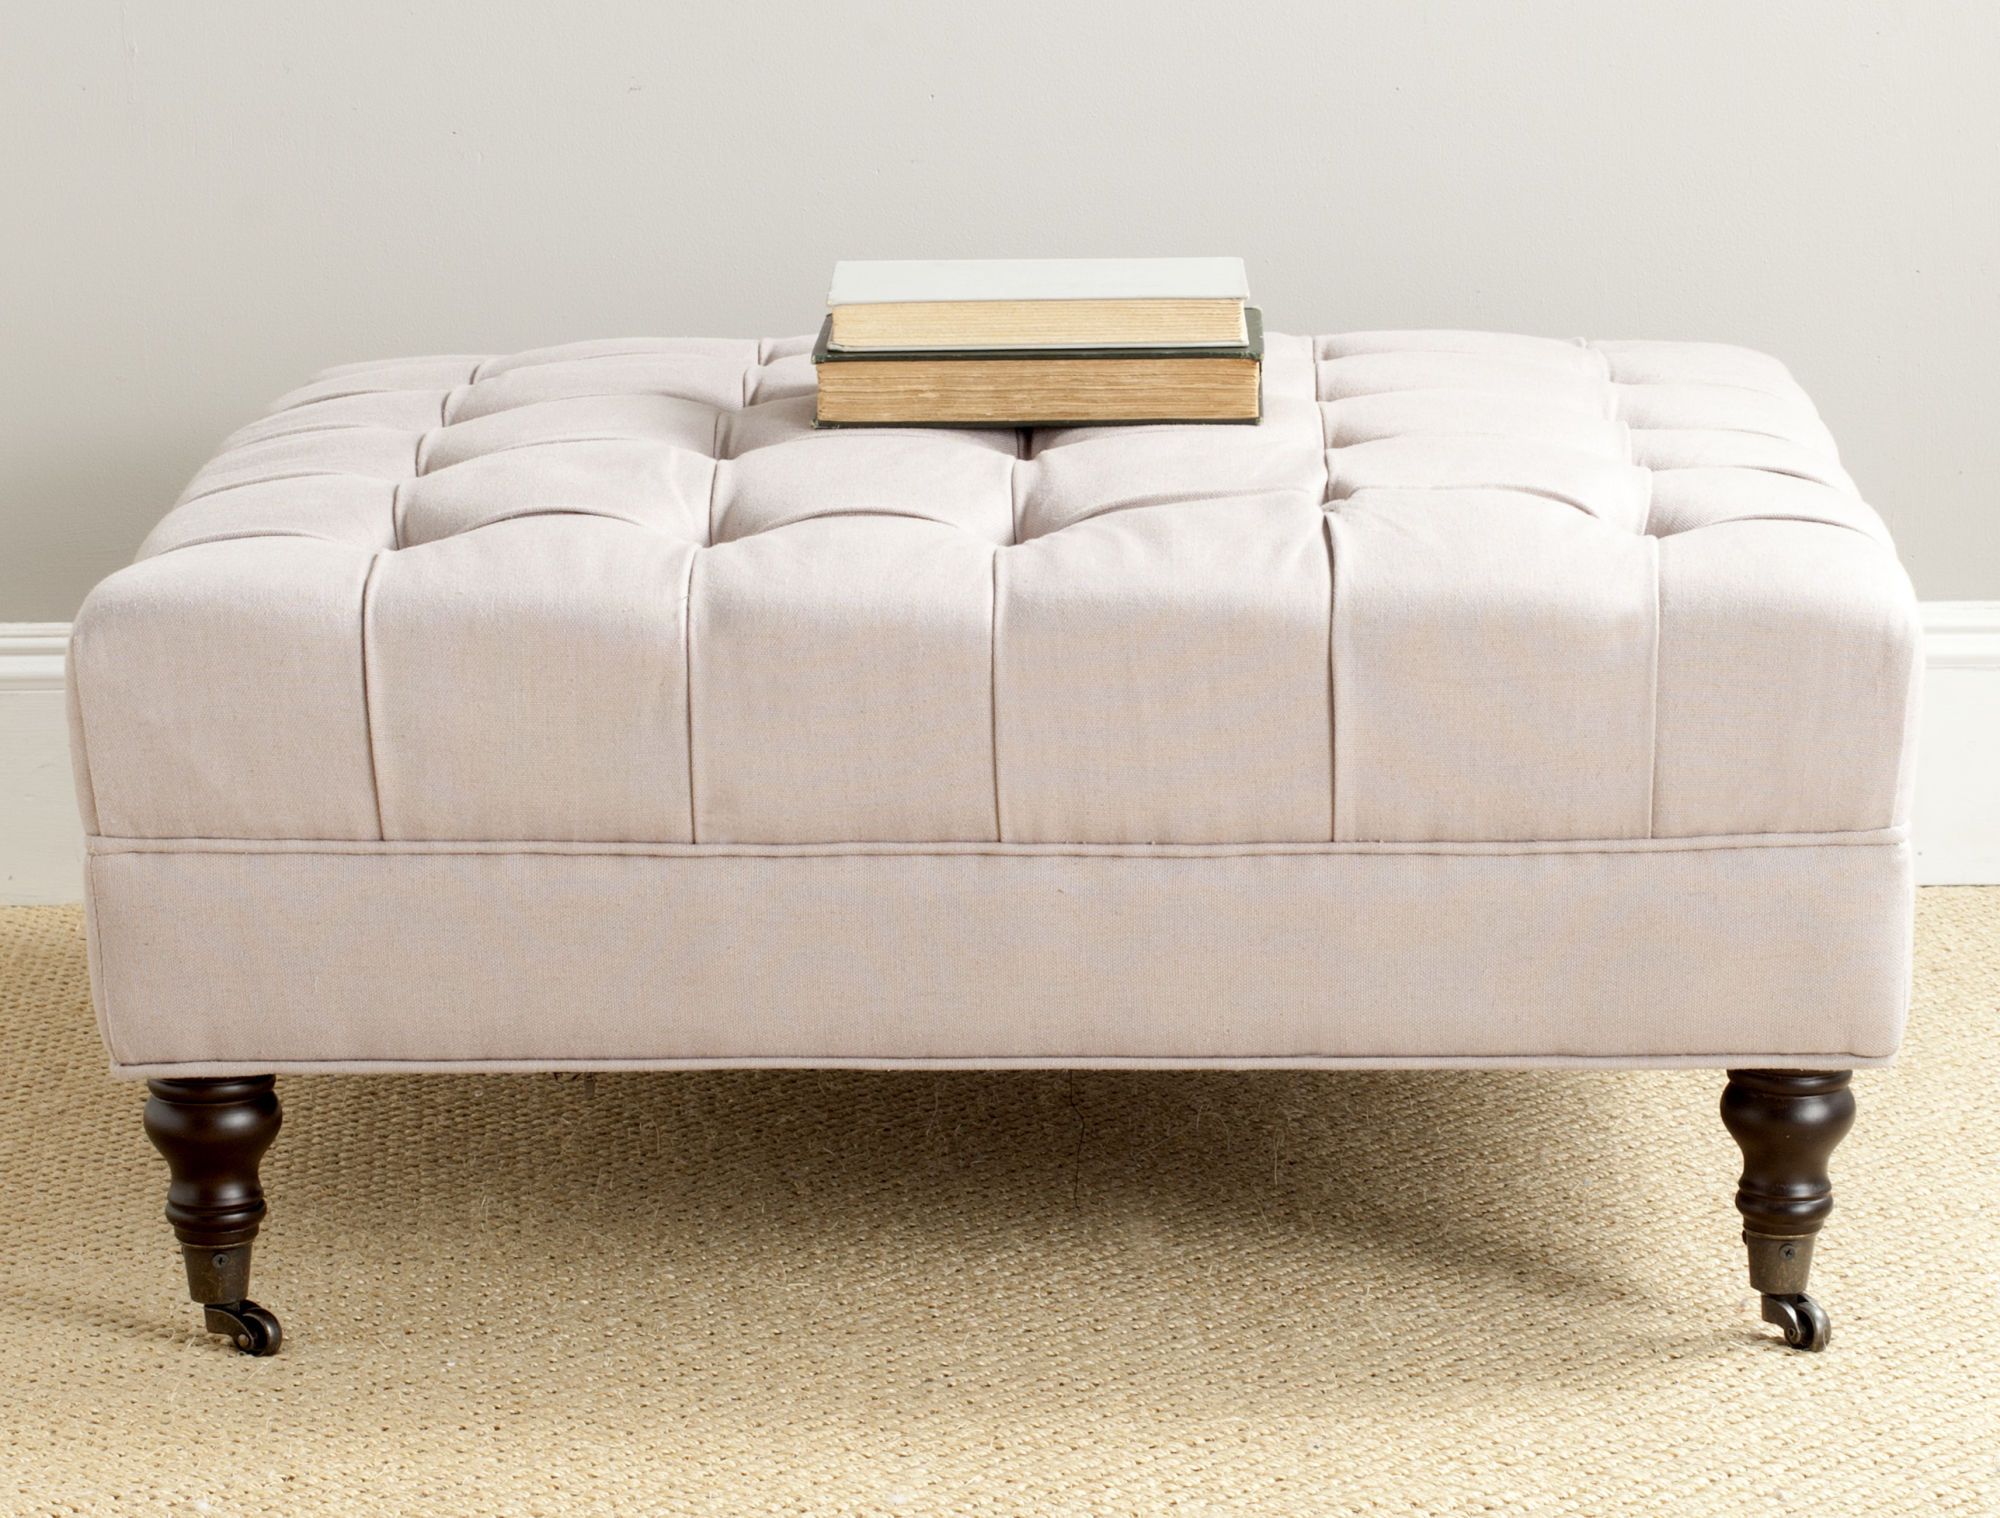 Clark Tufted Cocktail Ottoman With Current Tufted Ottoman Cocktail Tables (Gallery 1 of 20)